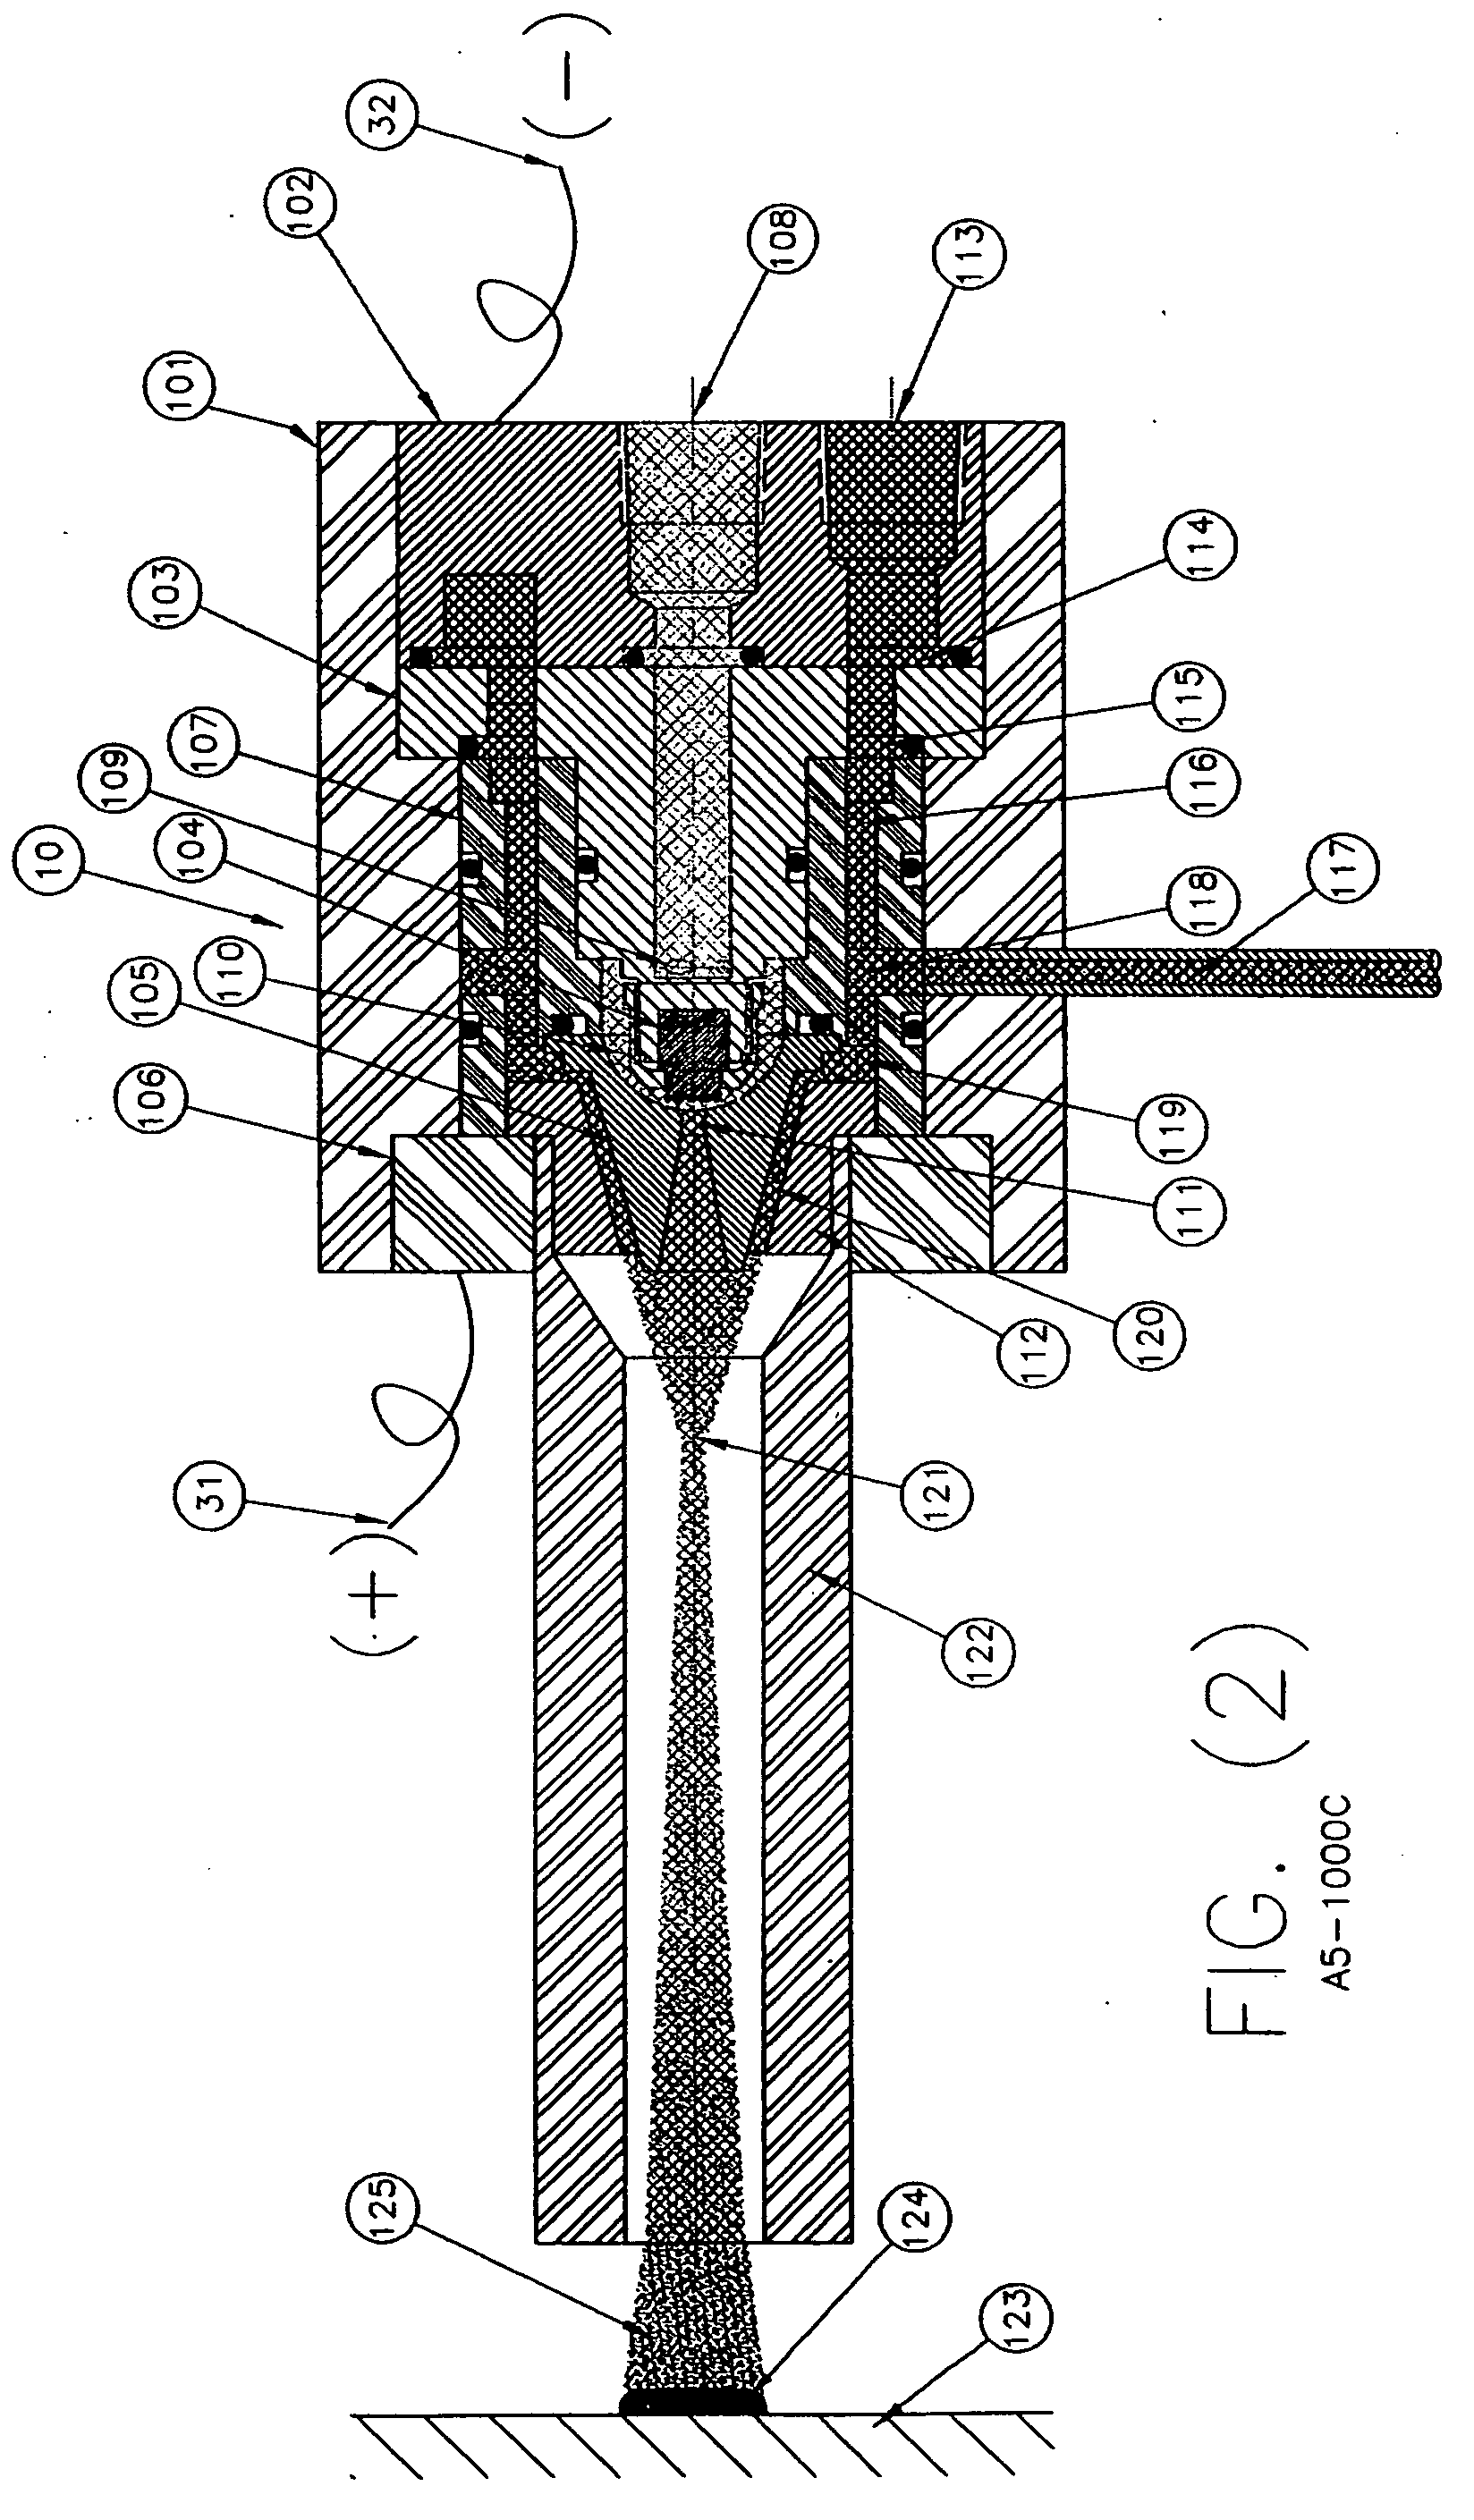 Plasma spray method and apparatus for applying a coating utilizing particle kinetics